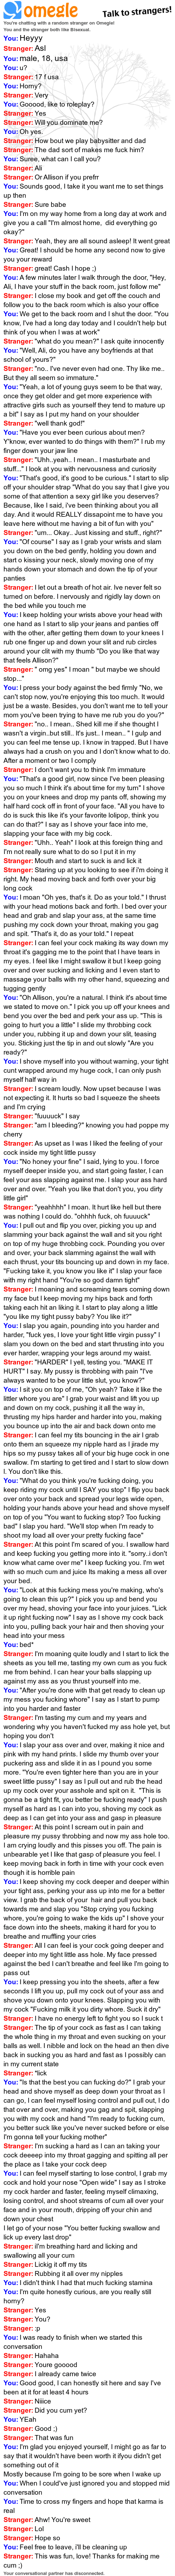 omegle roleplay chat log